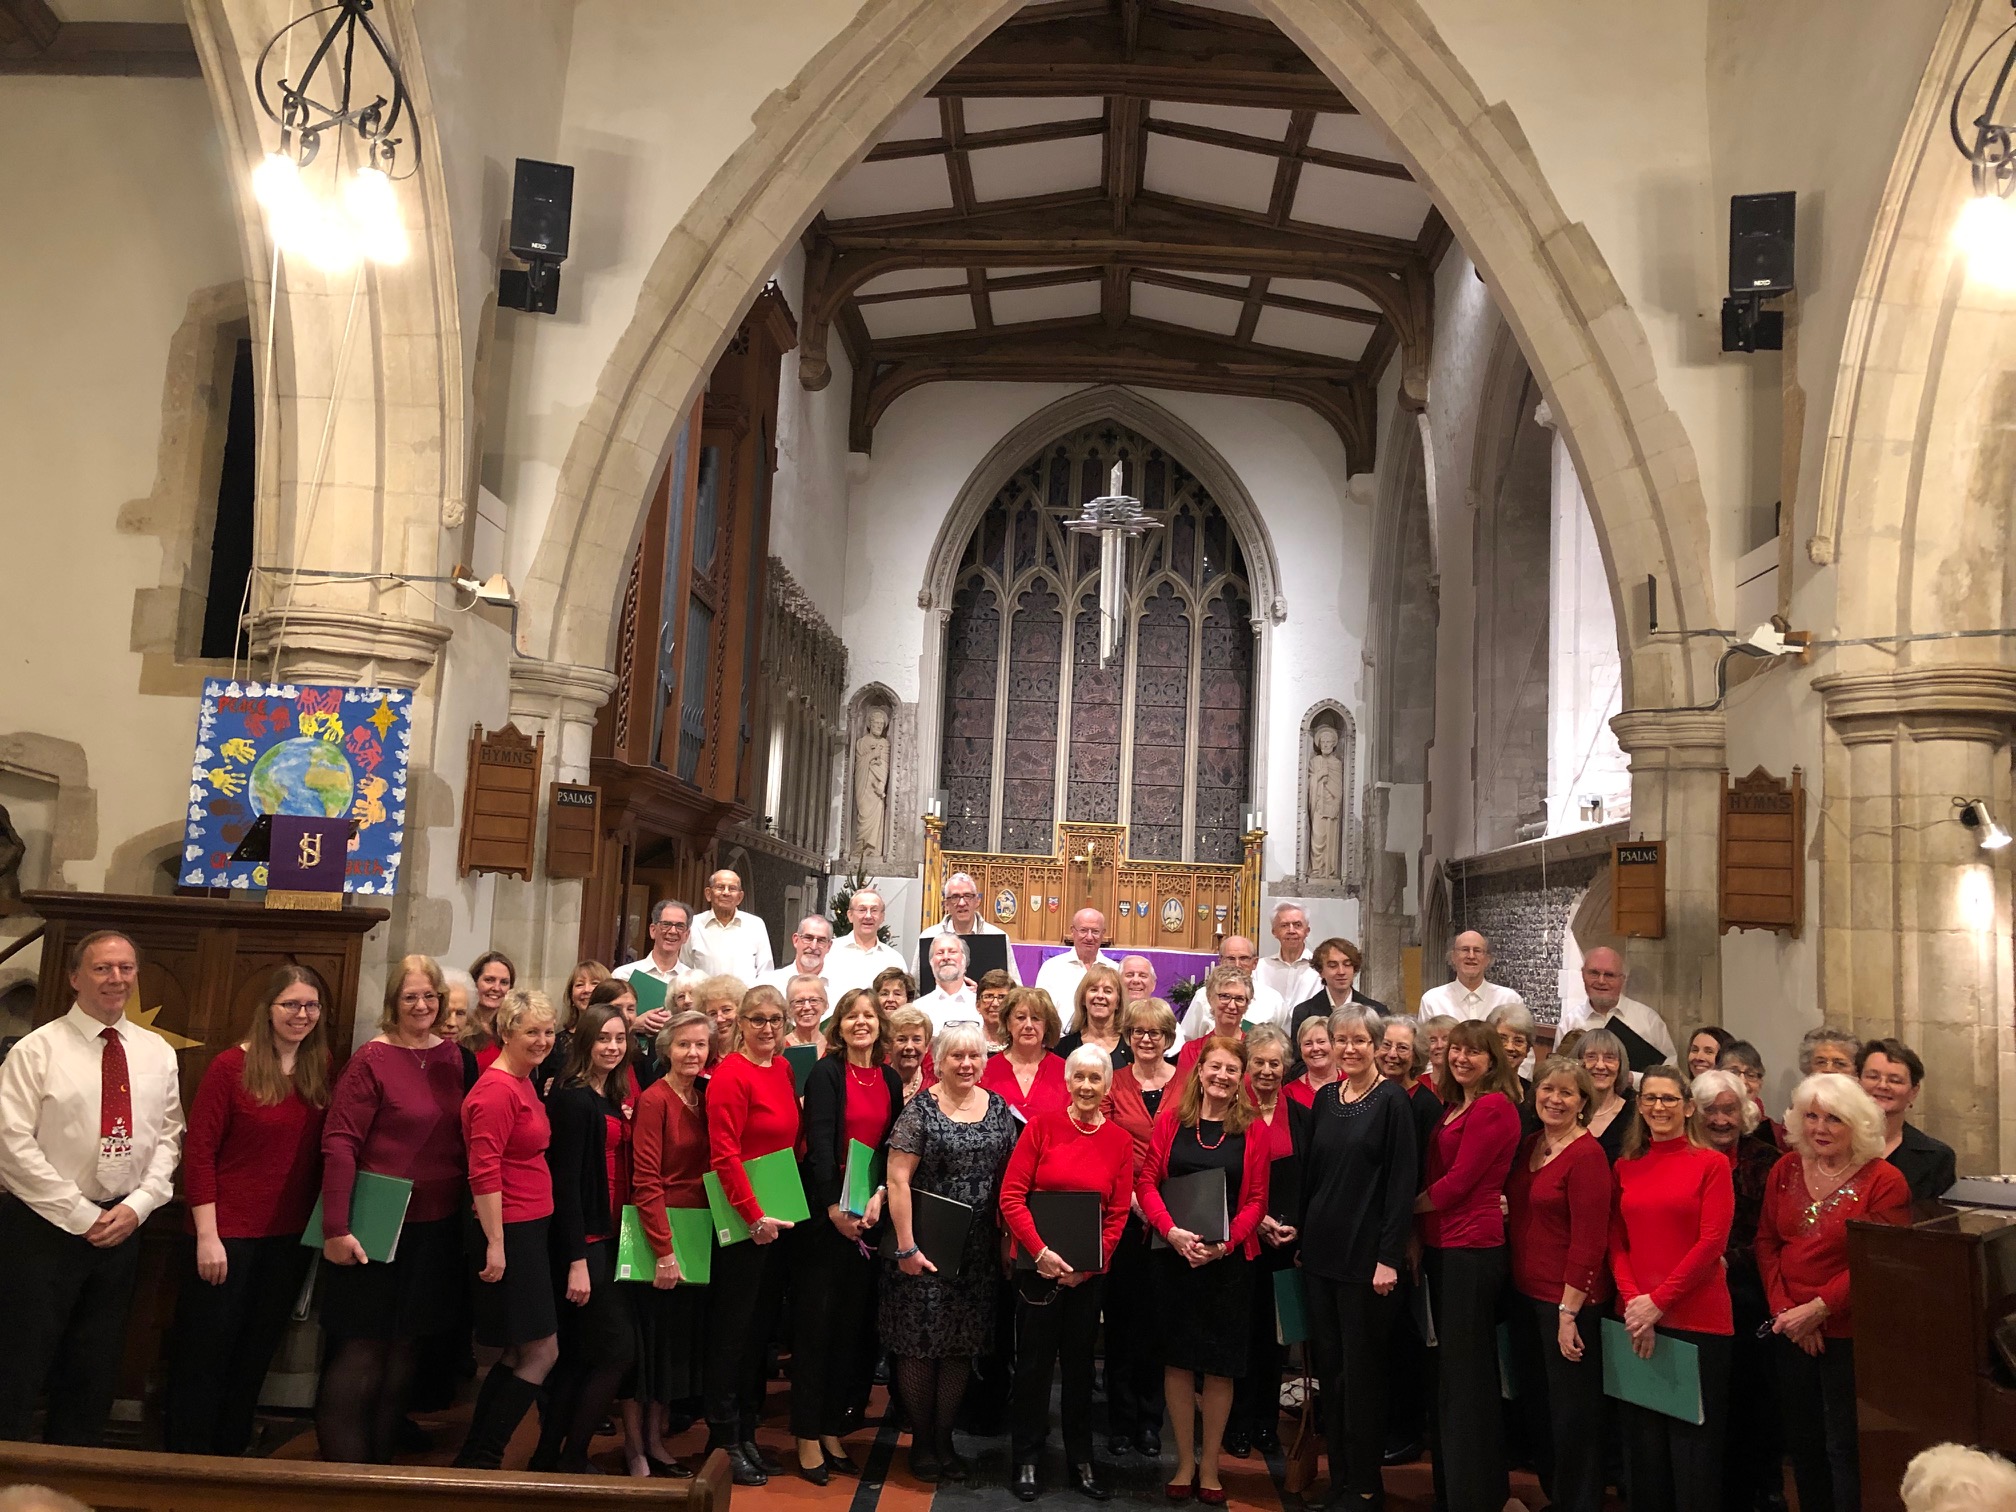 Our Christmas concert 2018 joint with The Heatherton Singers